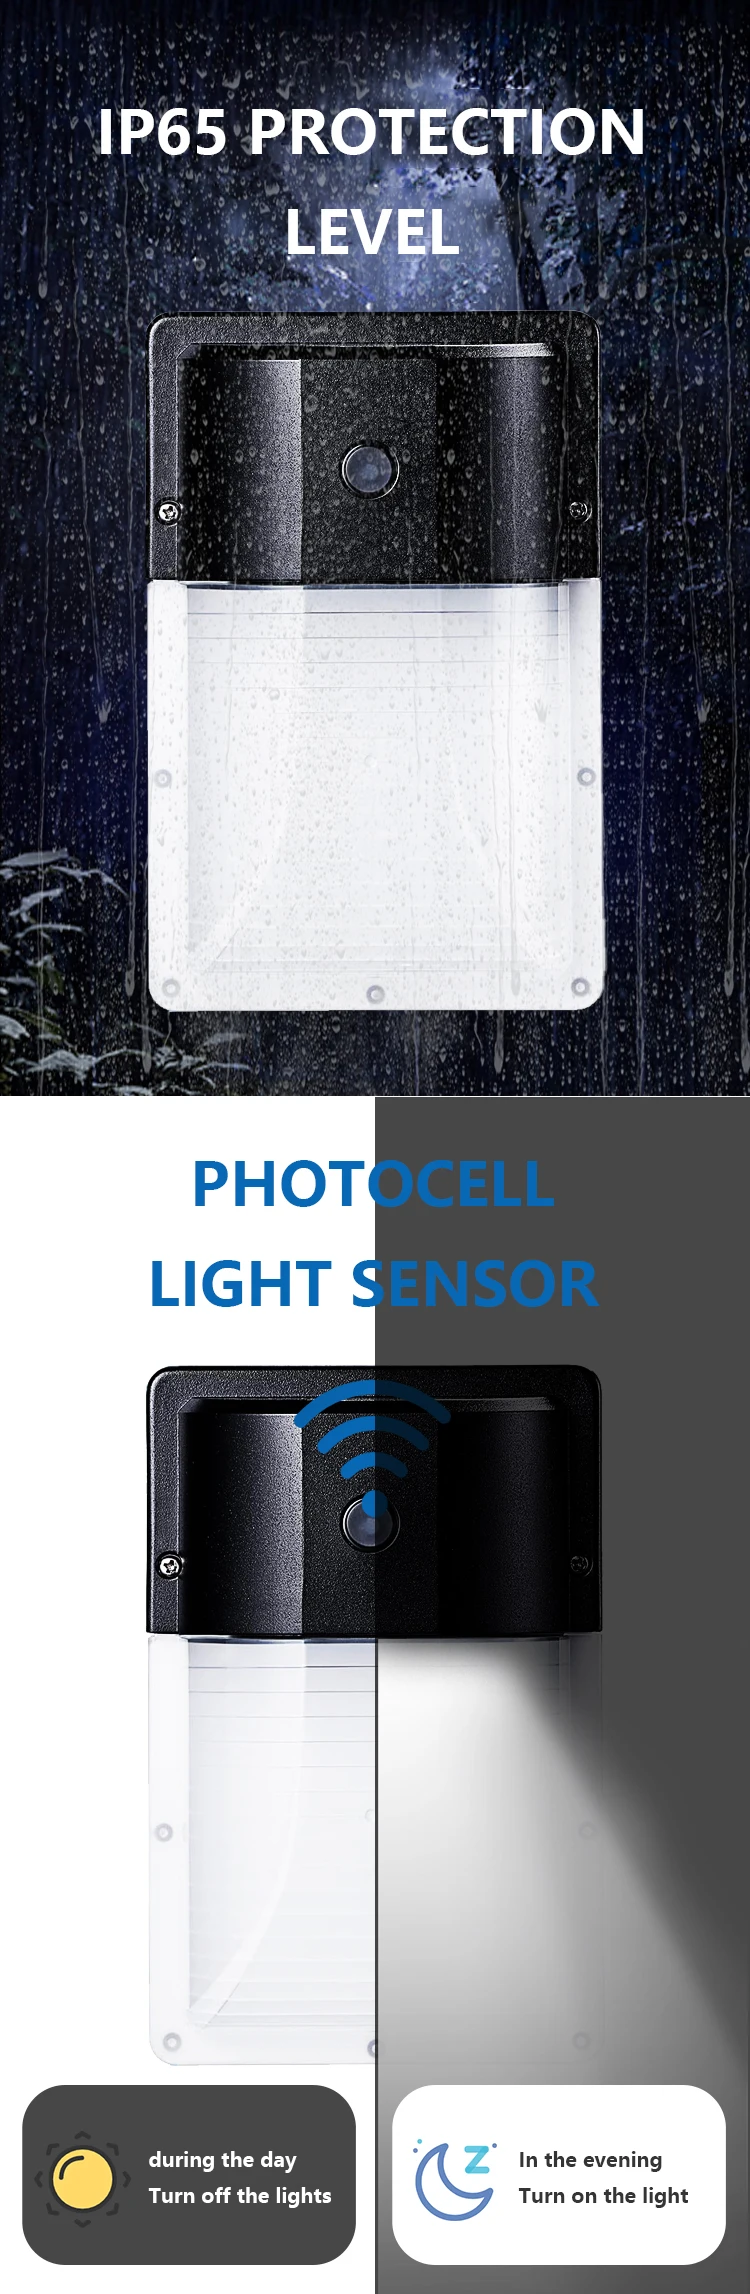 ETL DLC have inventory commercial with photocell Motion Sensor LED Wall Pack lighting 18w